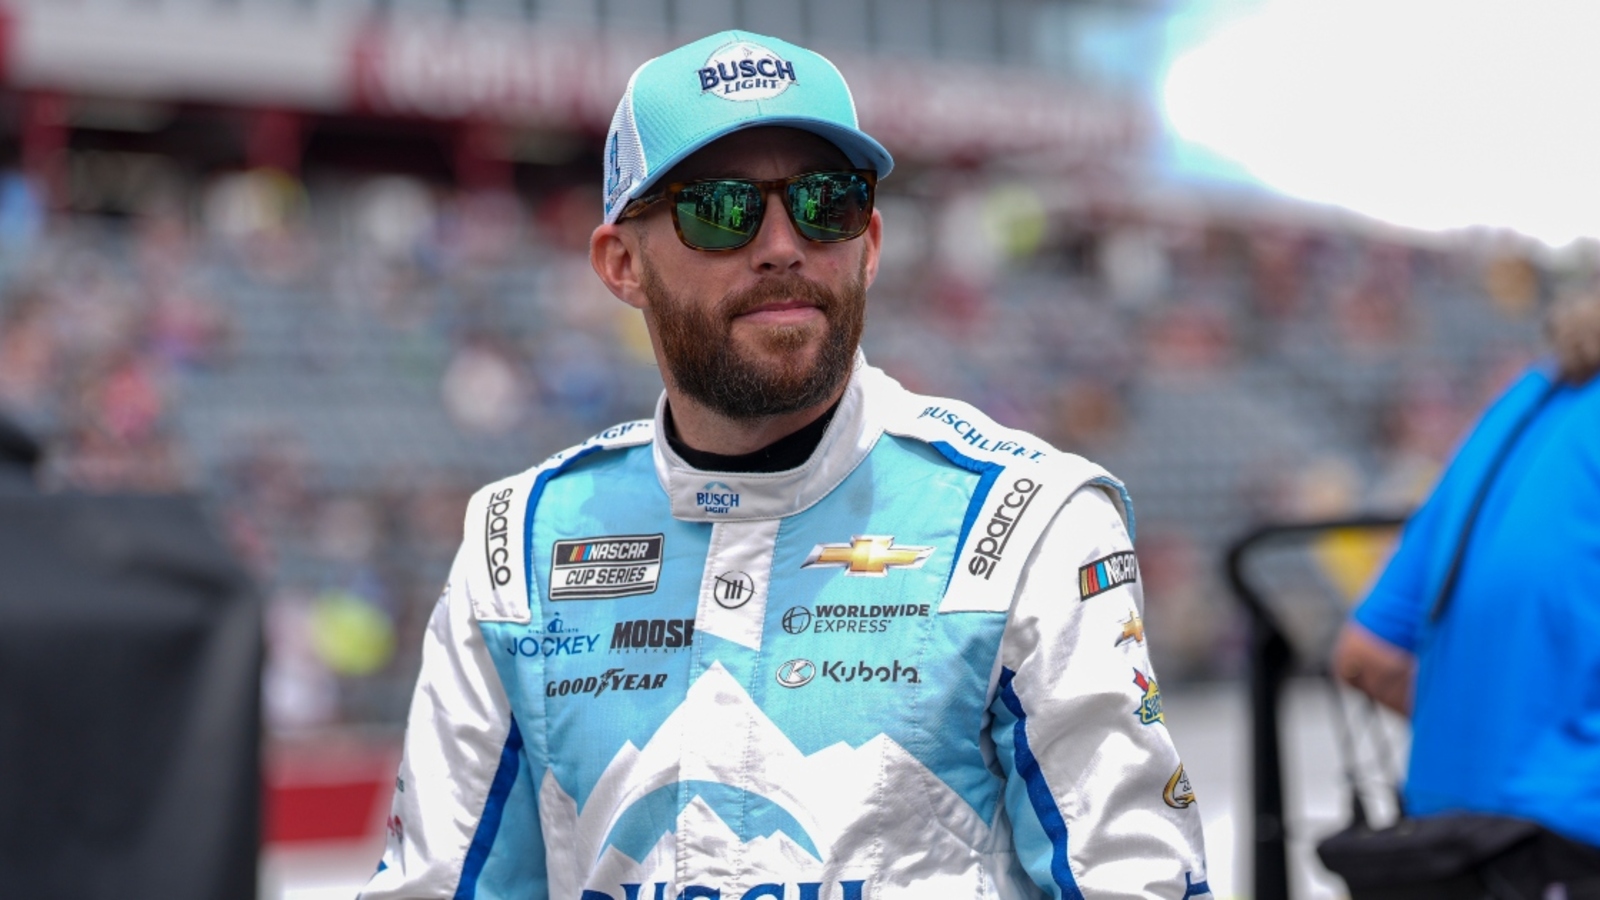 Despite poor qualifying effort, Ross Chastain confident he has a ‘top-five car’